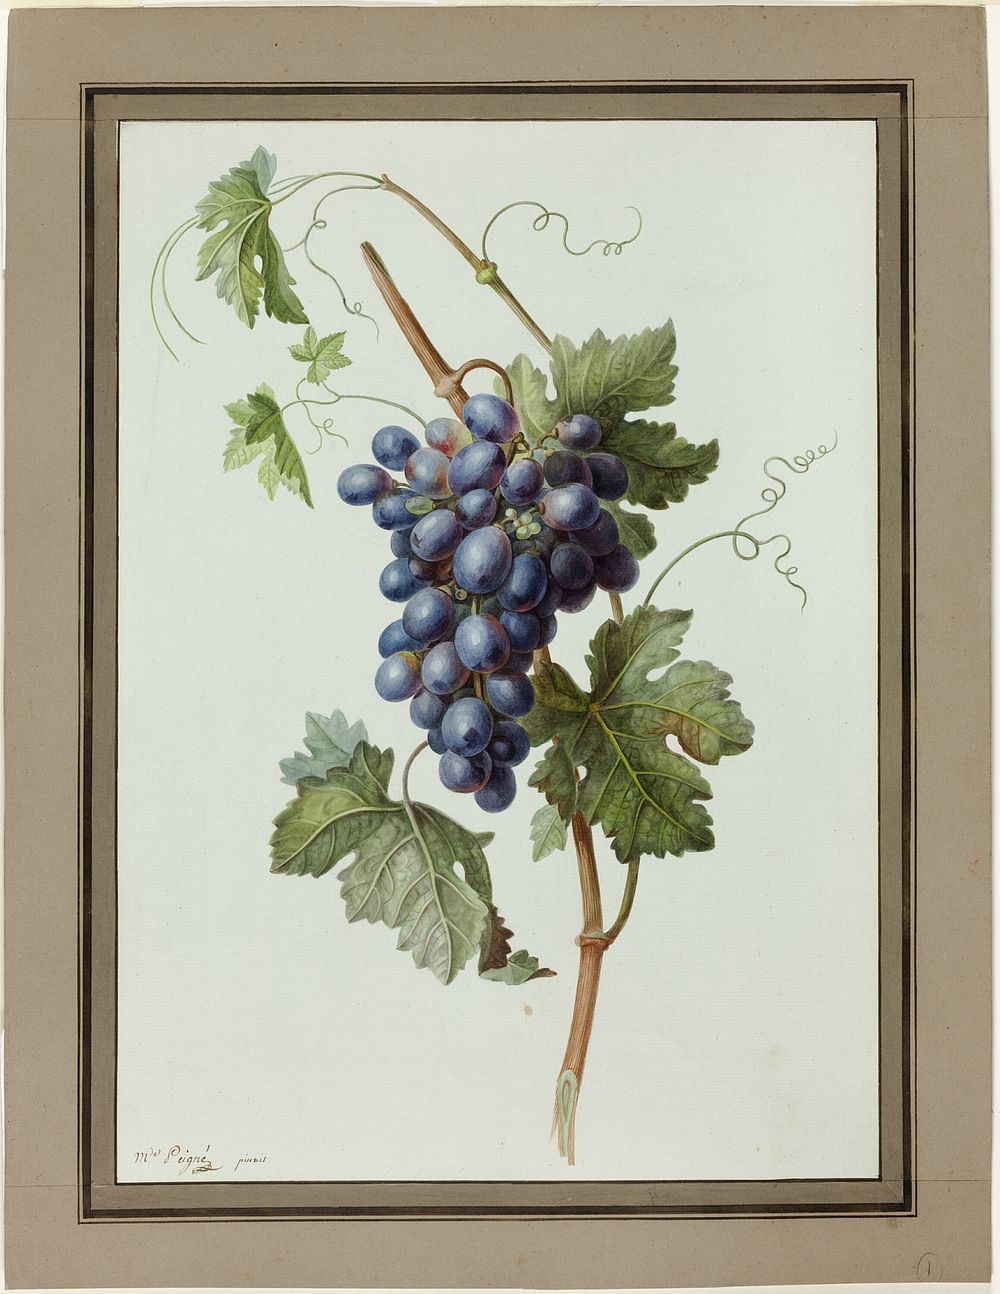 Study of a Bunch of Grapes by Mme. Peigné